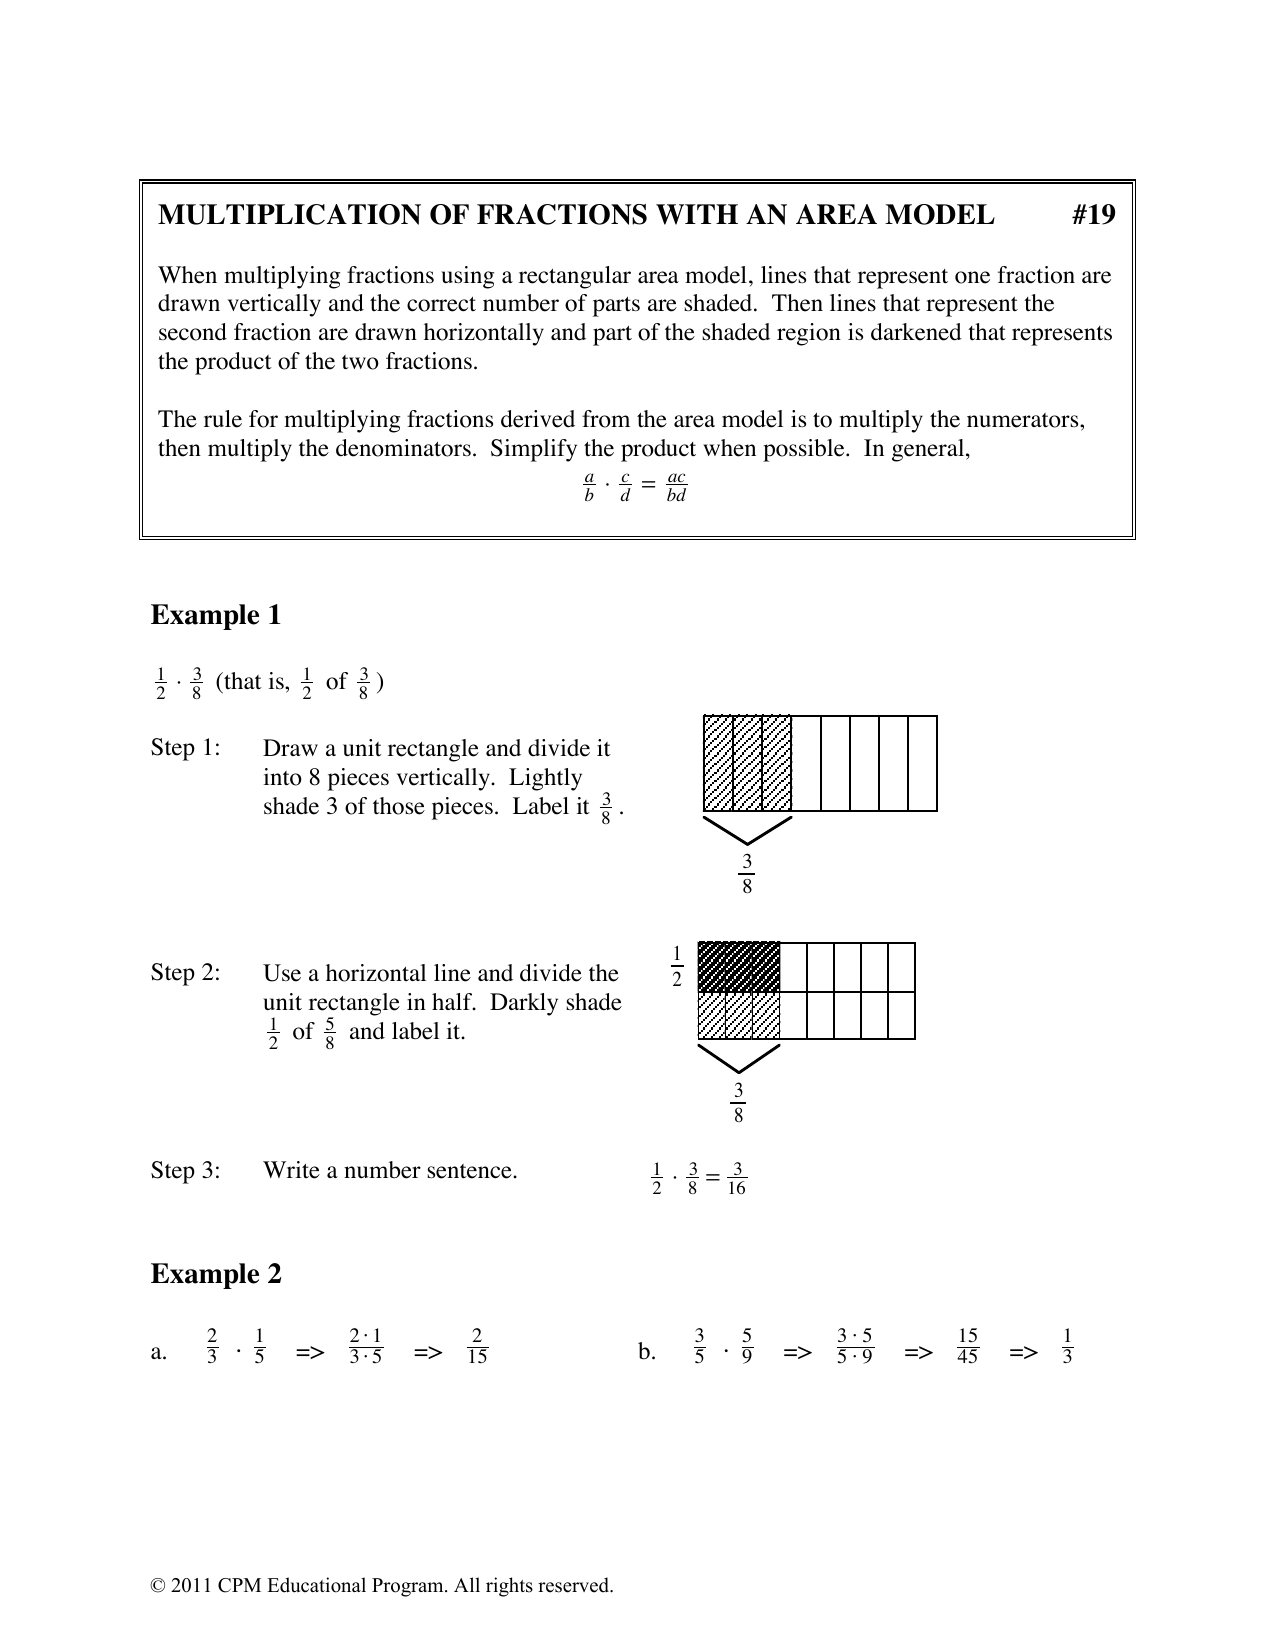 area-model-multiplication-of-fractions-math-251-week-3-multiplication-and-division-of